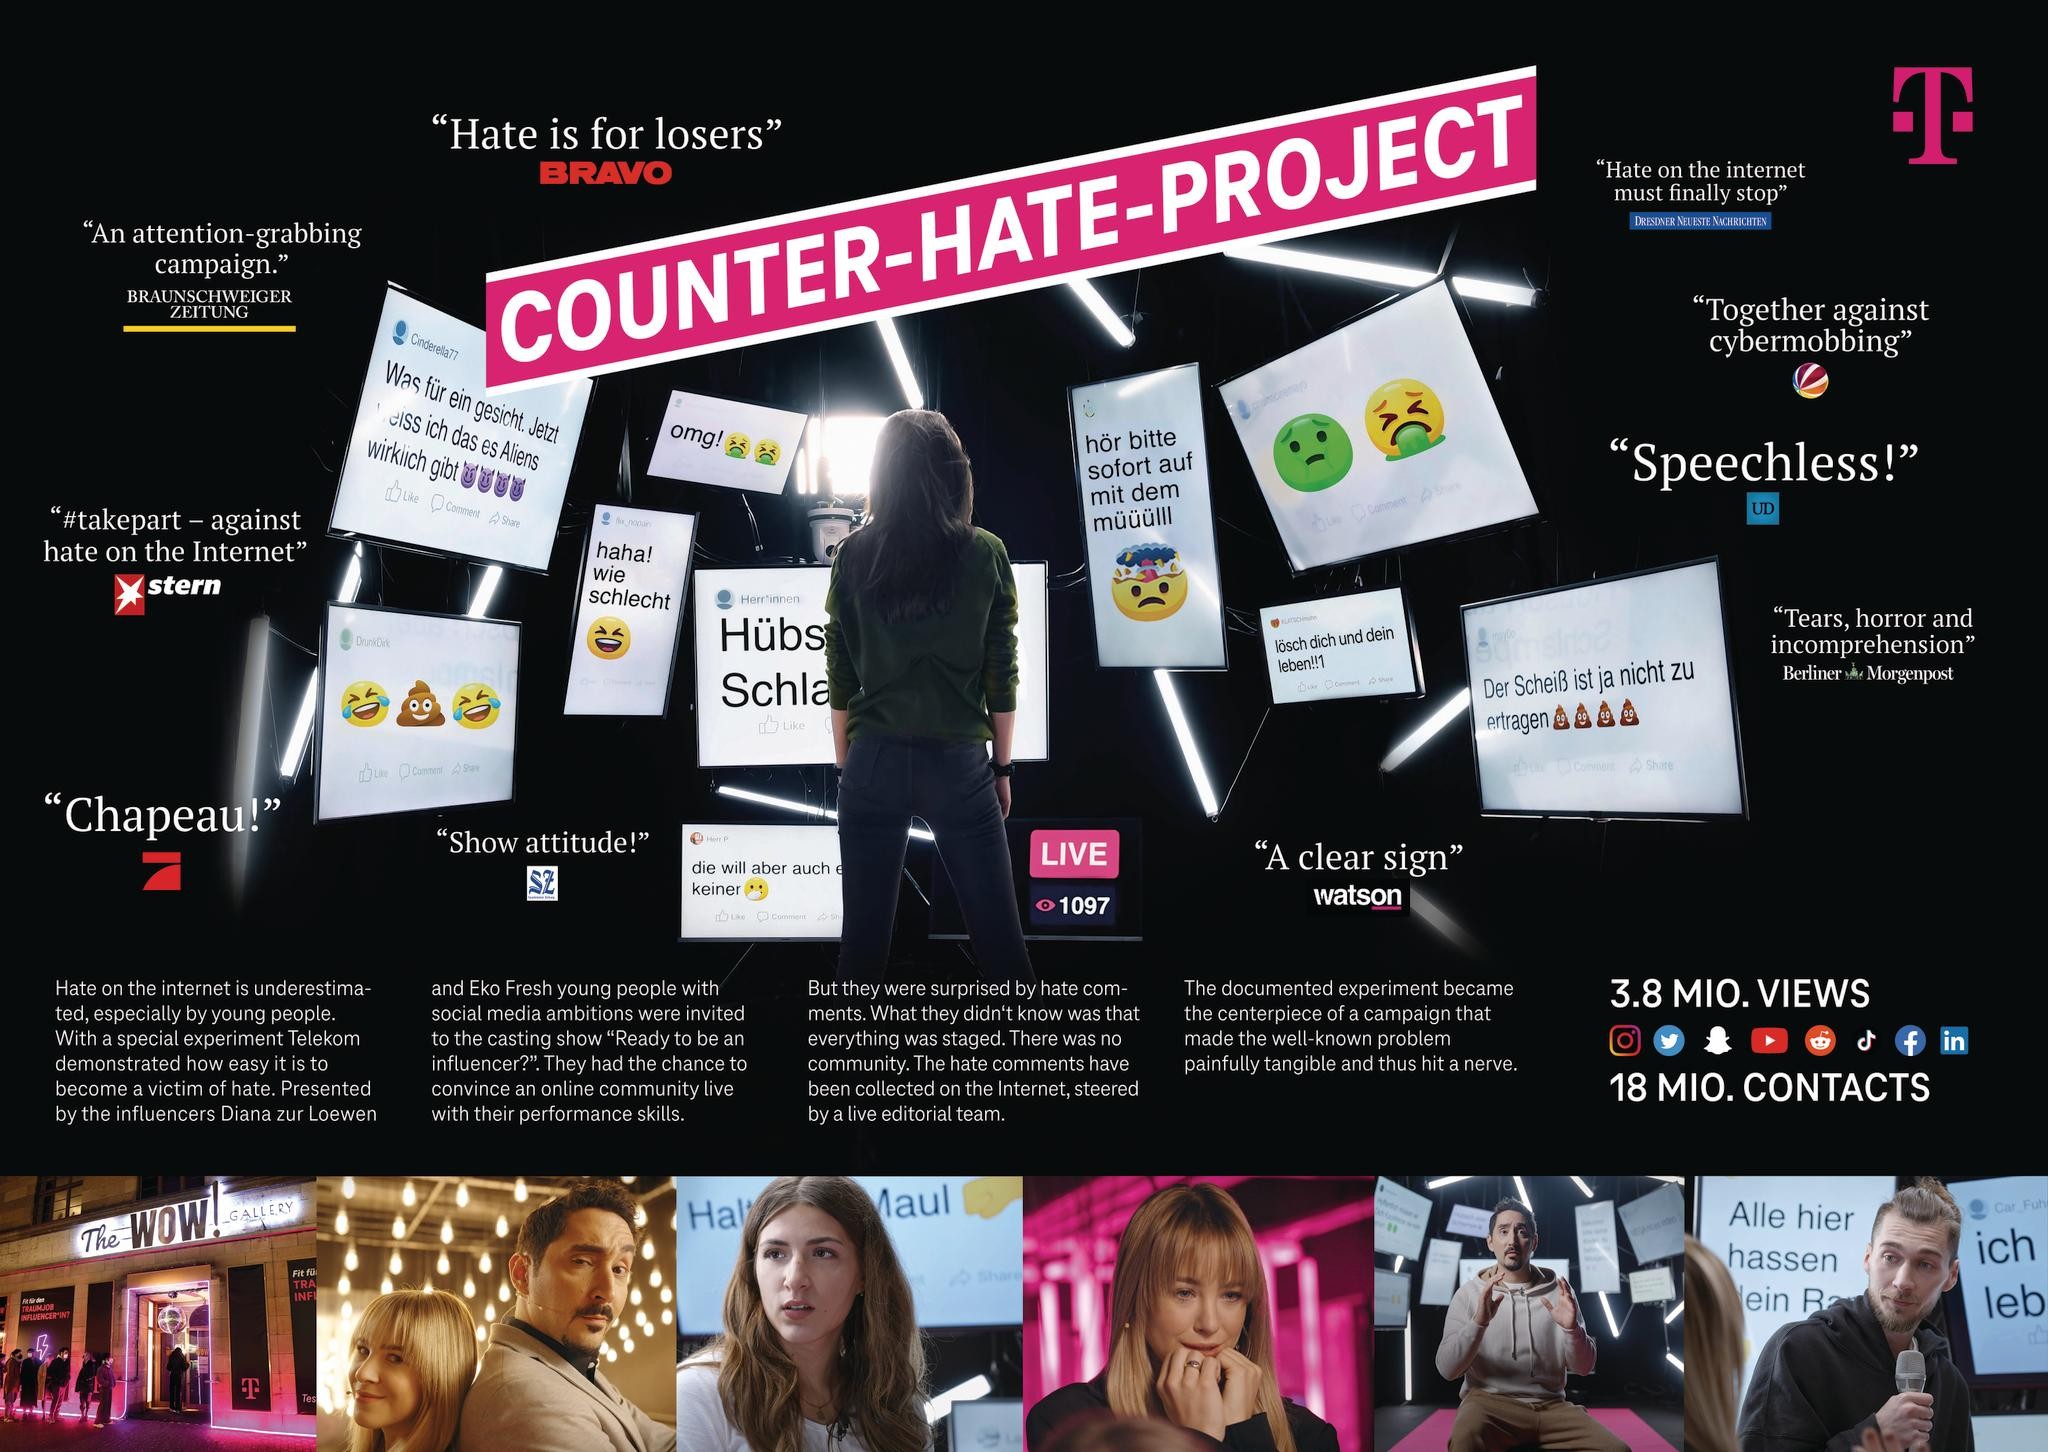 The Counter-Hate-Project